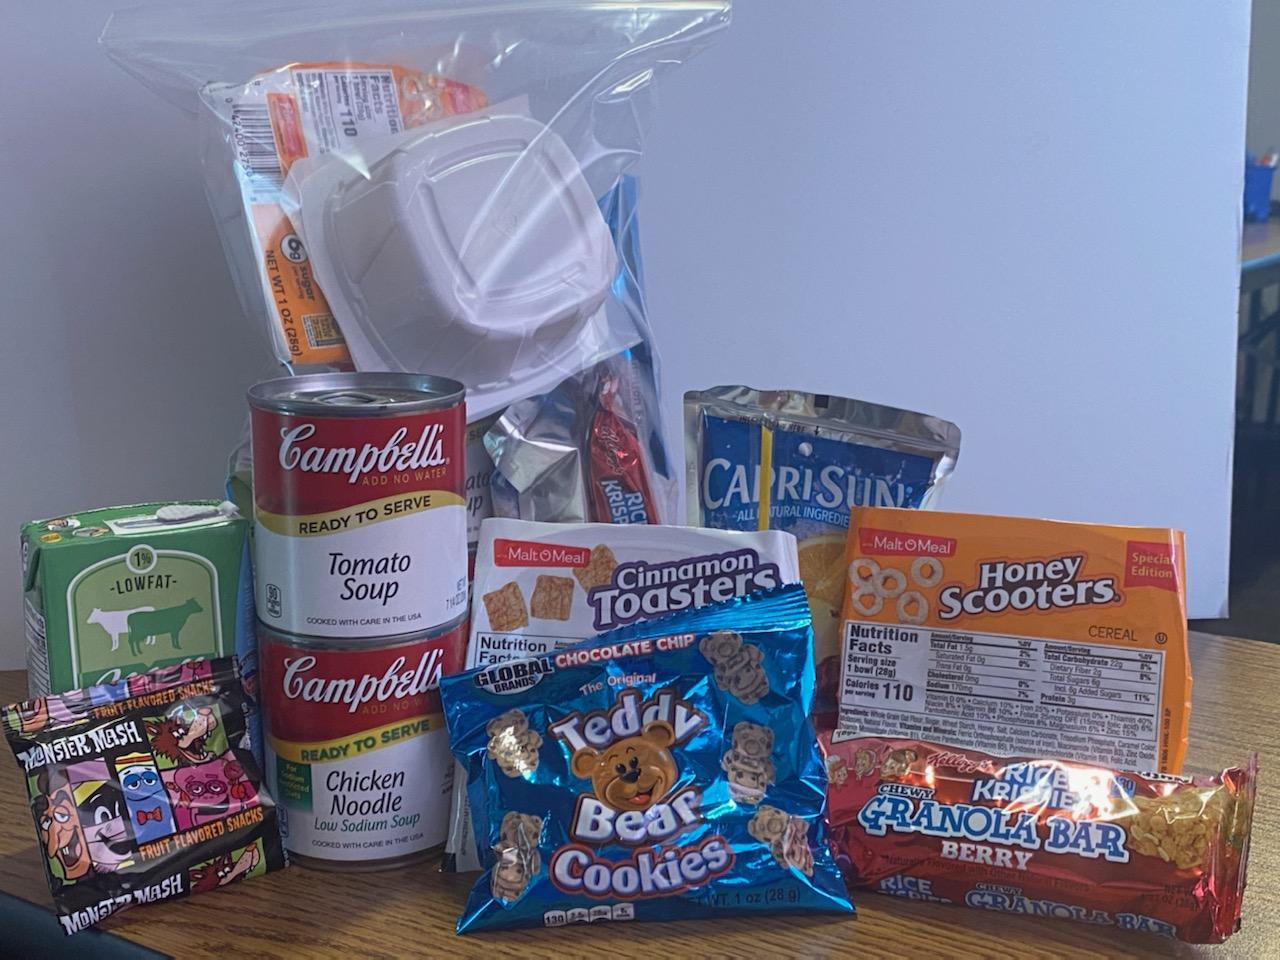 Food items On A Desk - Soup, Milk, Capri Sun, Fruit Snacks, and other various items